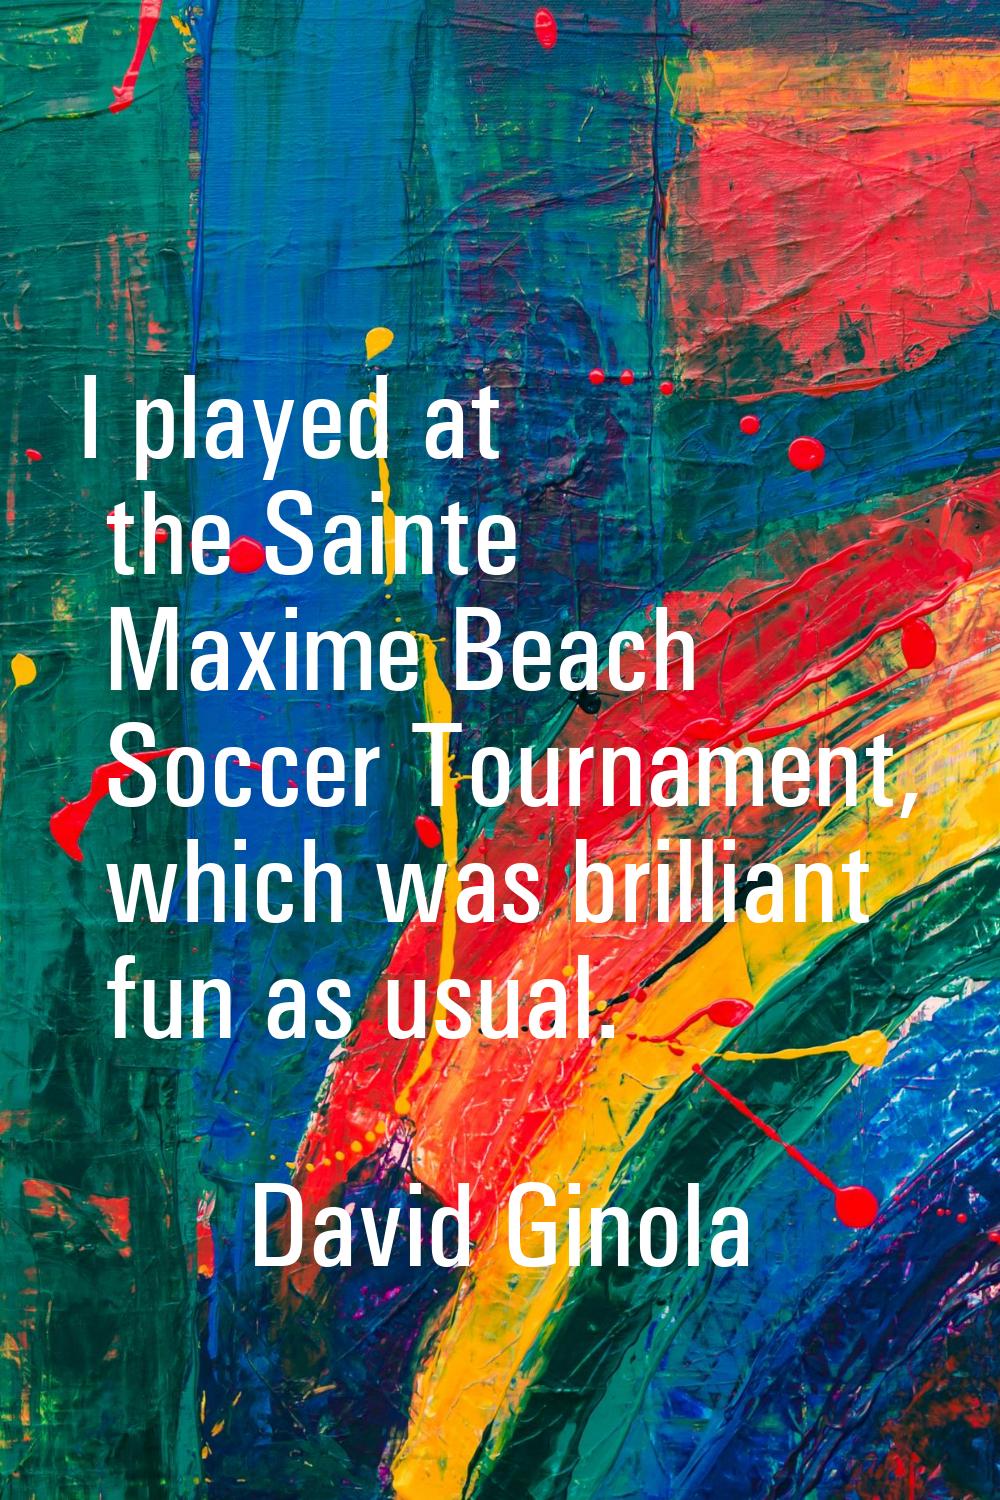 I played at the Sainte Maxime Beach Soccer Tournament, which was brilliant fun as usual.